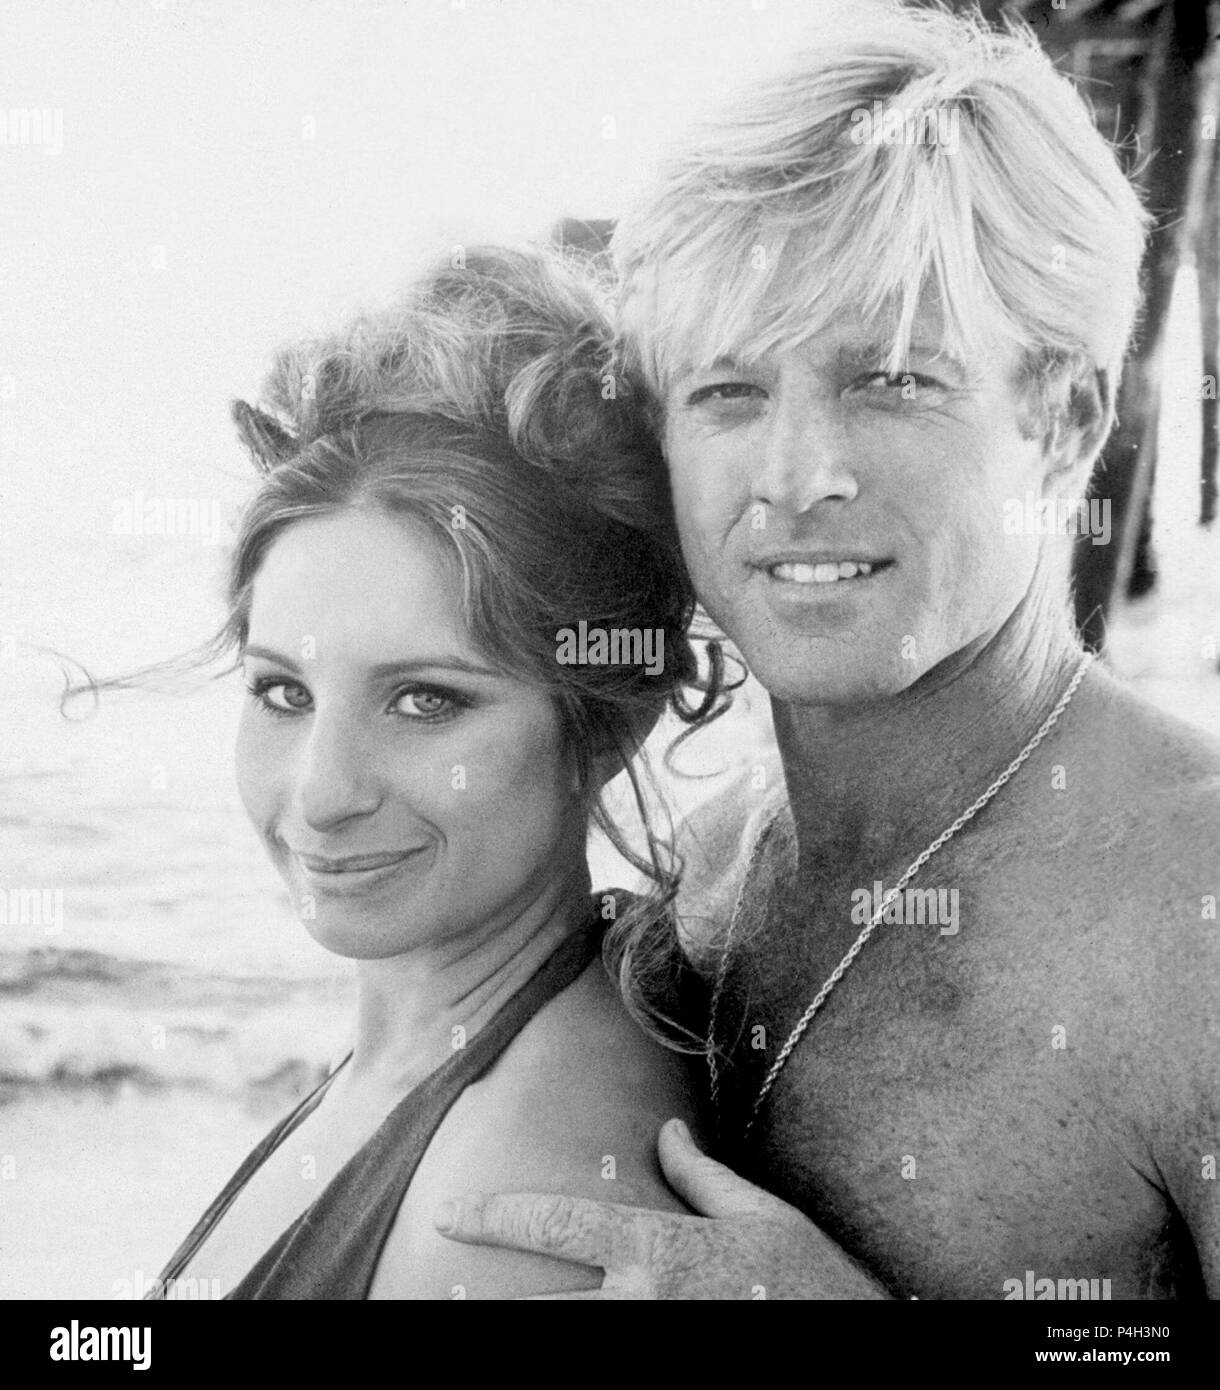 Original Film Title: THE WAY WE WERE.  English Title: THE WAY WE WERE.  Film Director: SYDNEY POLLACK.  Year: 1973.  Stars: BARBRA STREISAND; ROBERT REDFORD. Credit: COLUMBIA PICTURES / Album Stock Photo